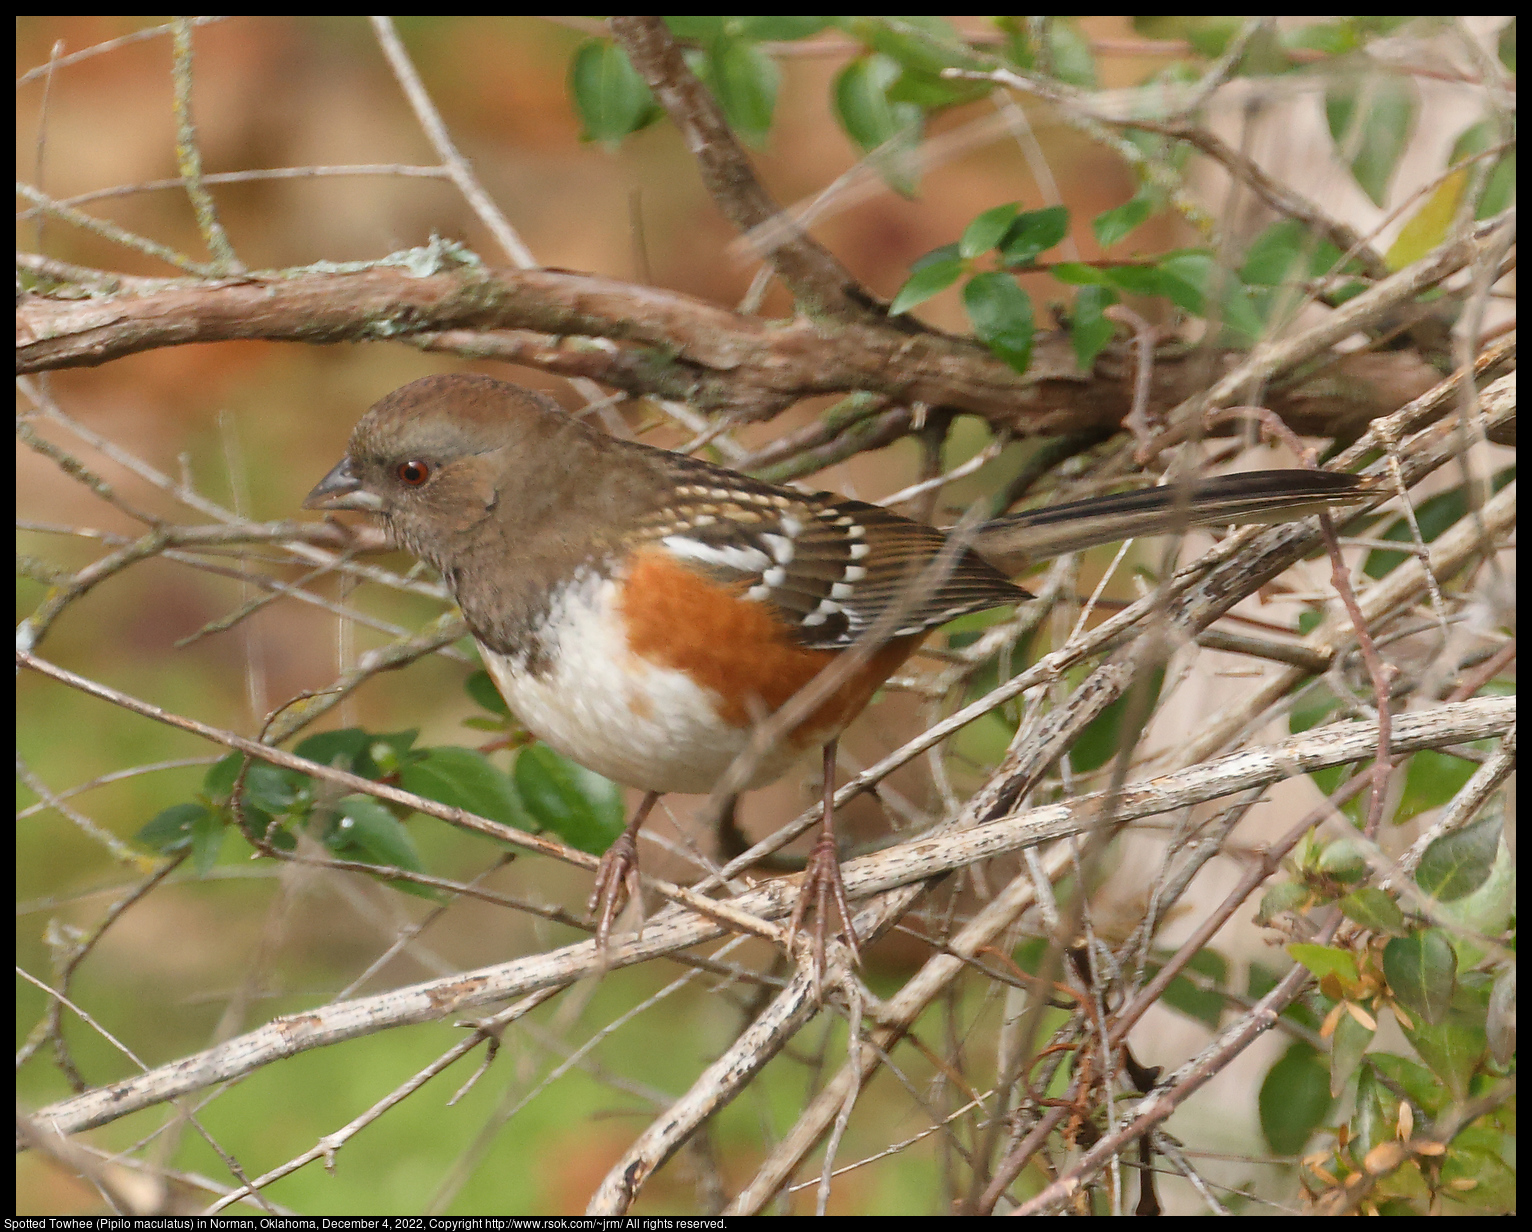 Spotted Towhee (Pipilo maculatus) in Norman, Oklahoma, December 4, 2022